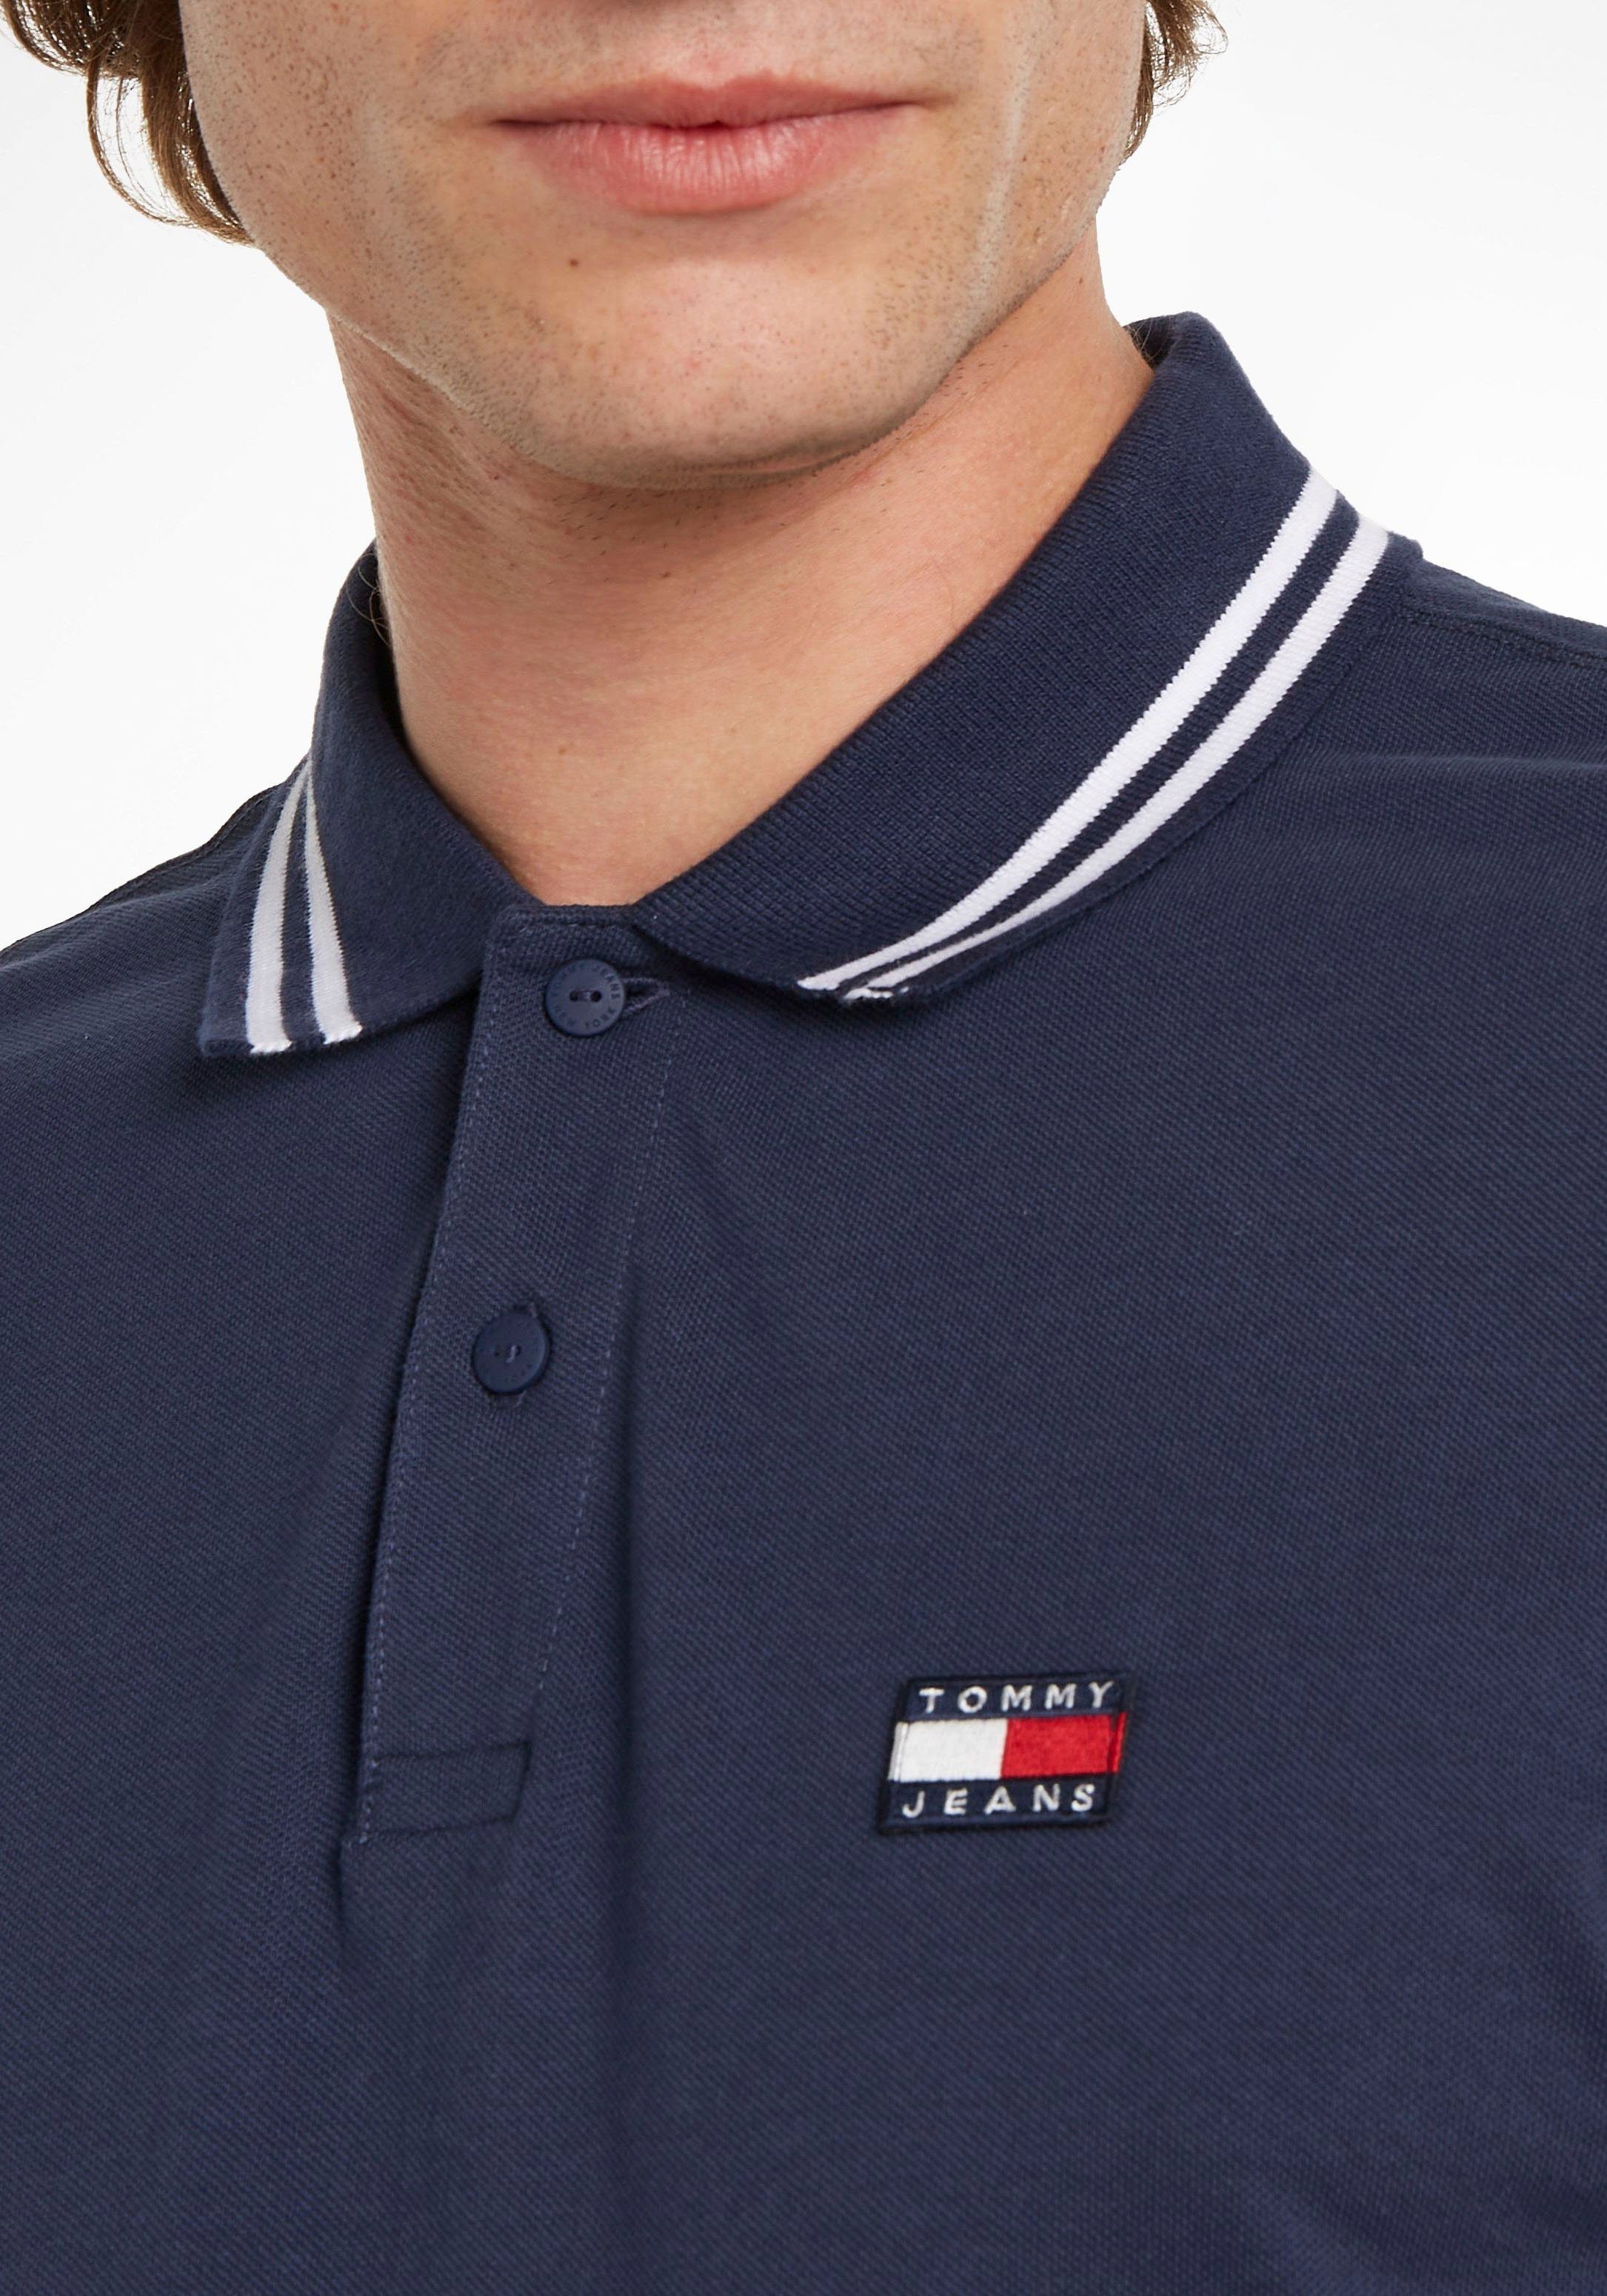 Tommy Jeans Poloshirt TJM CLSC Navy POLO Twilight DETAIL TIPPING